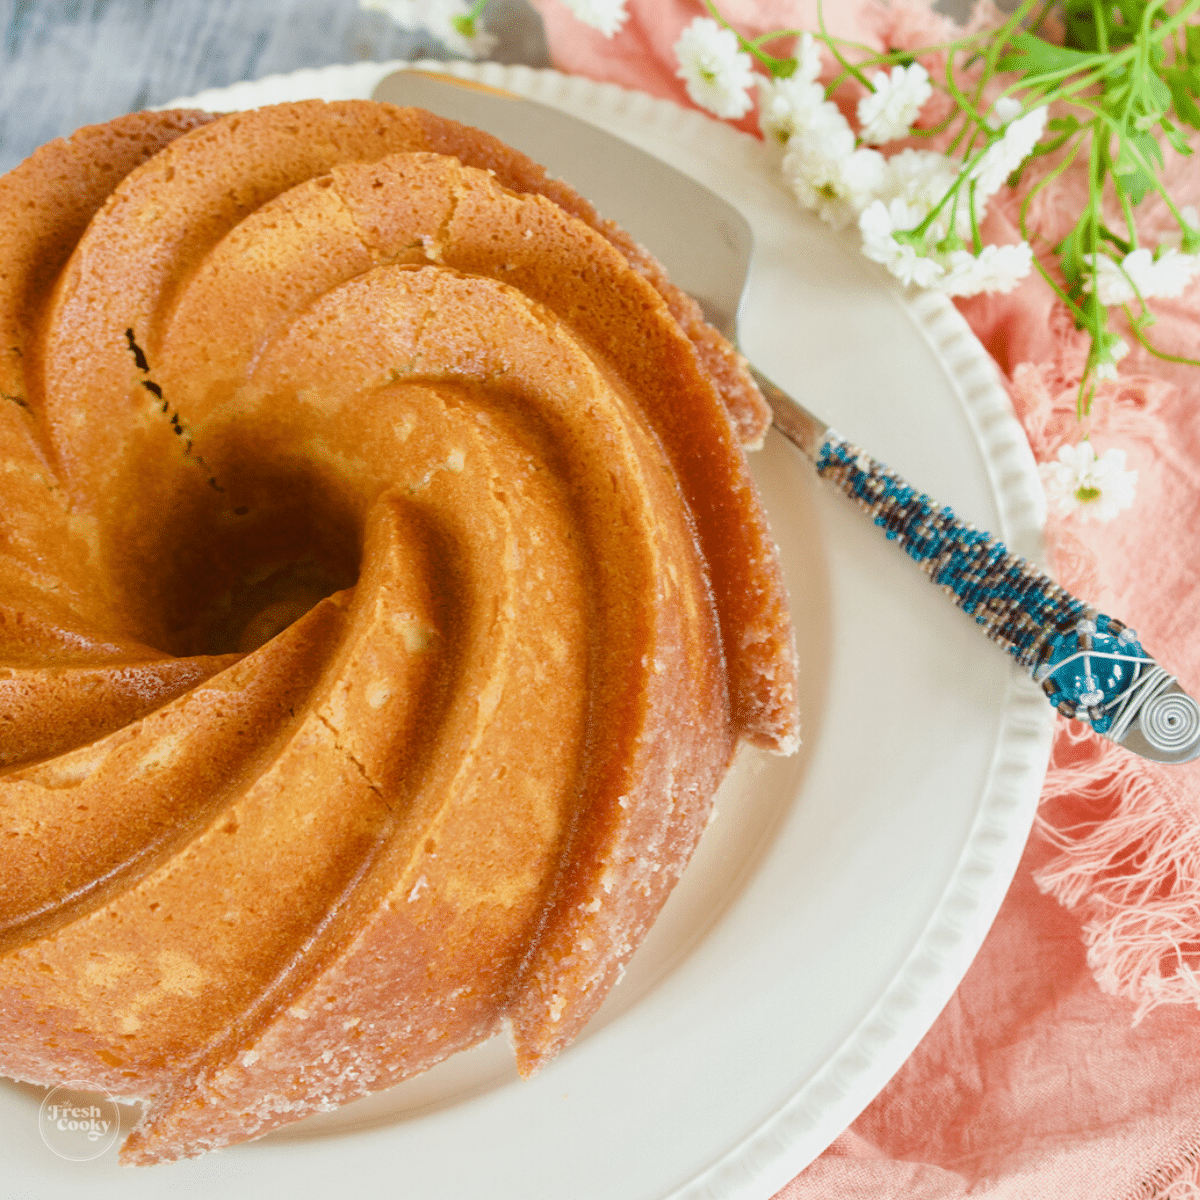 https://www.thefreshcooky.com/wp-content/uploads/2018/05/Old-Fashioned-Butter-Pound-Cake-Recipe-Square.png